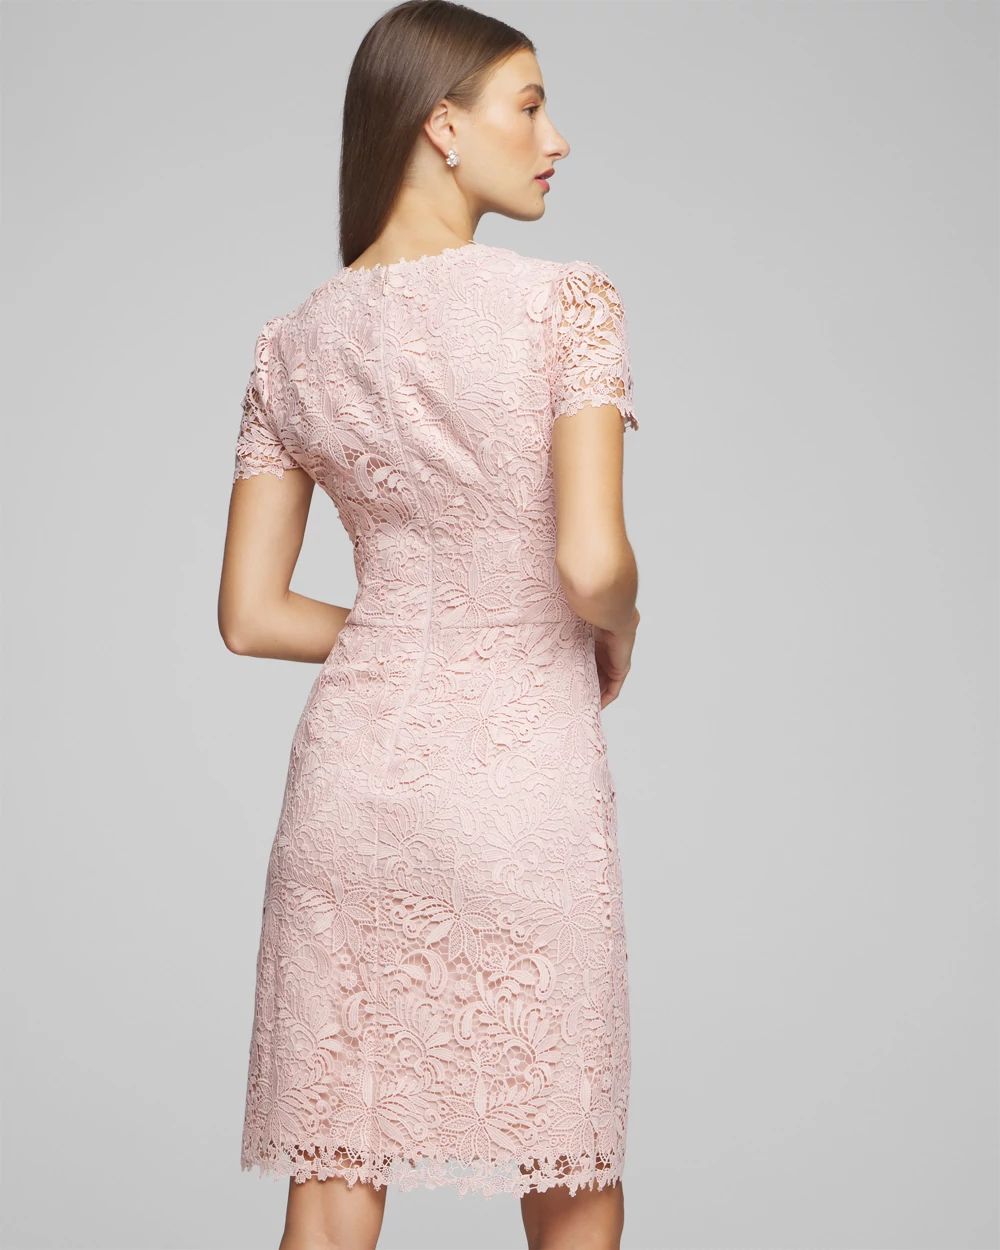 Cap Sleeve V-Neck Lace Sheath Dress click to view larger image.